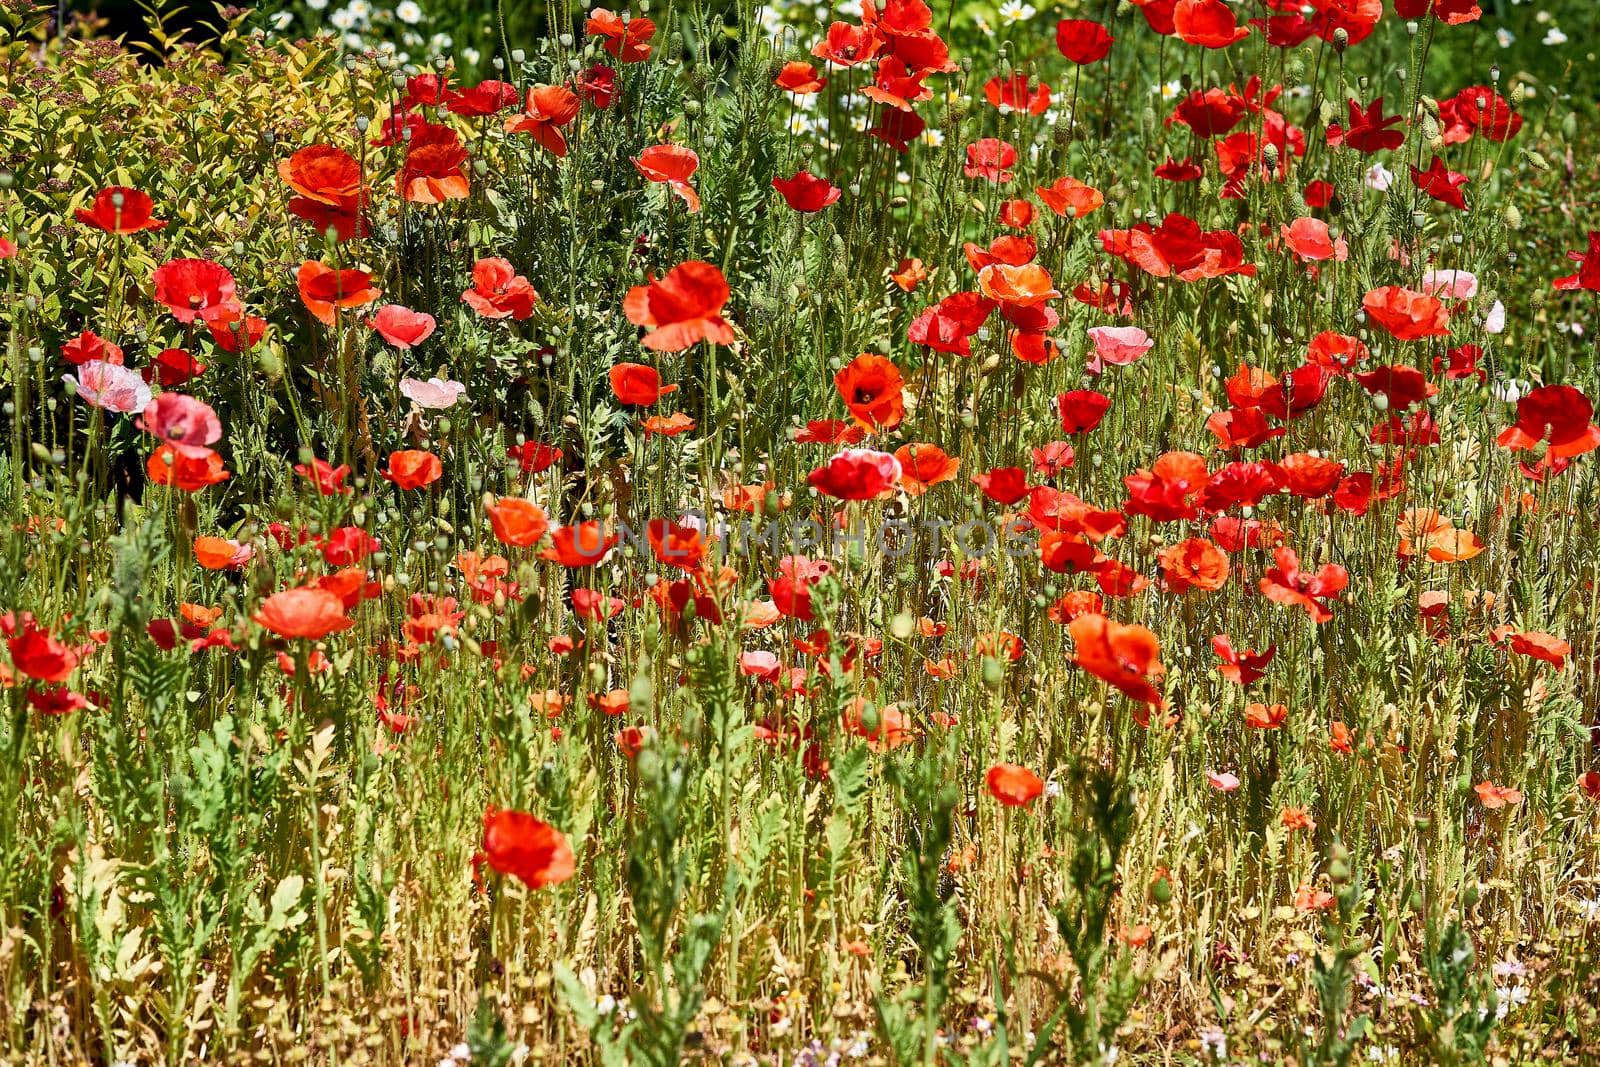 a herbaceous plant with showy flowers, milky sap, and rounded seed capsules. Many poppies contain alkaloids and are a source of drugs such as morphine and codeine. Sunny meadow with red tender poppies